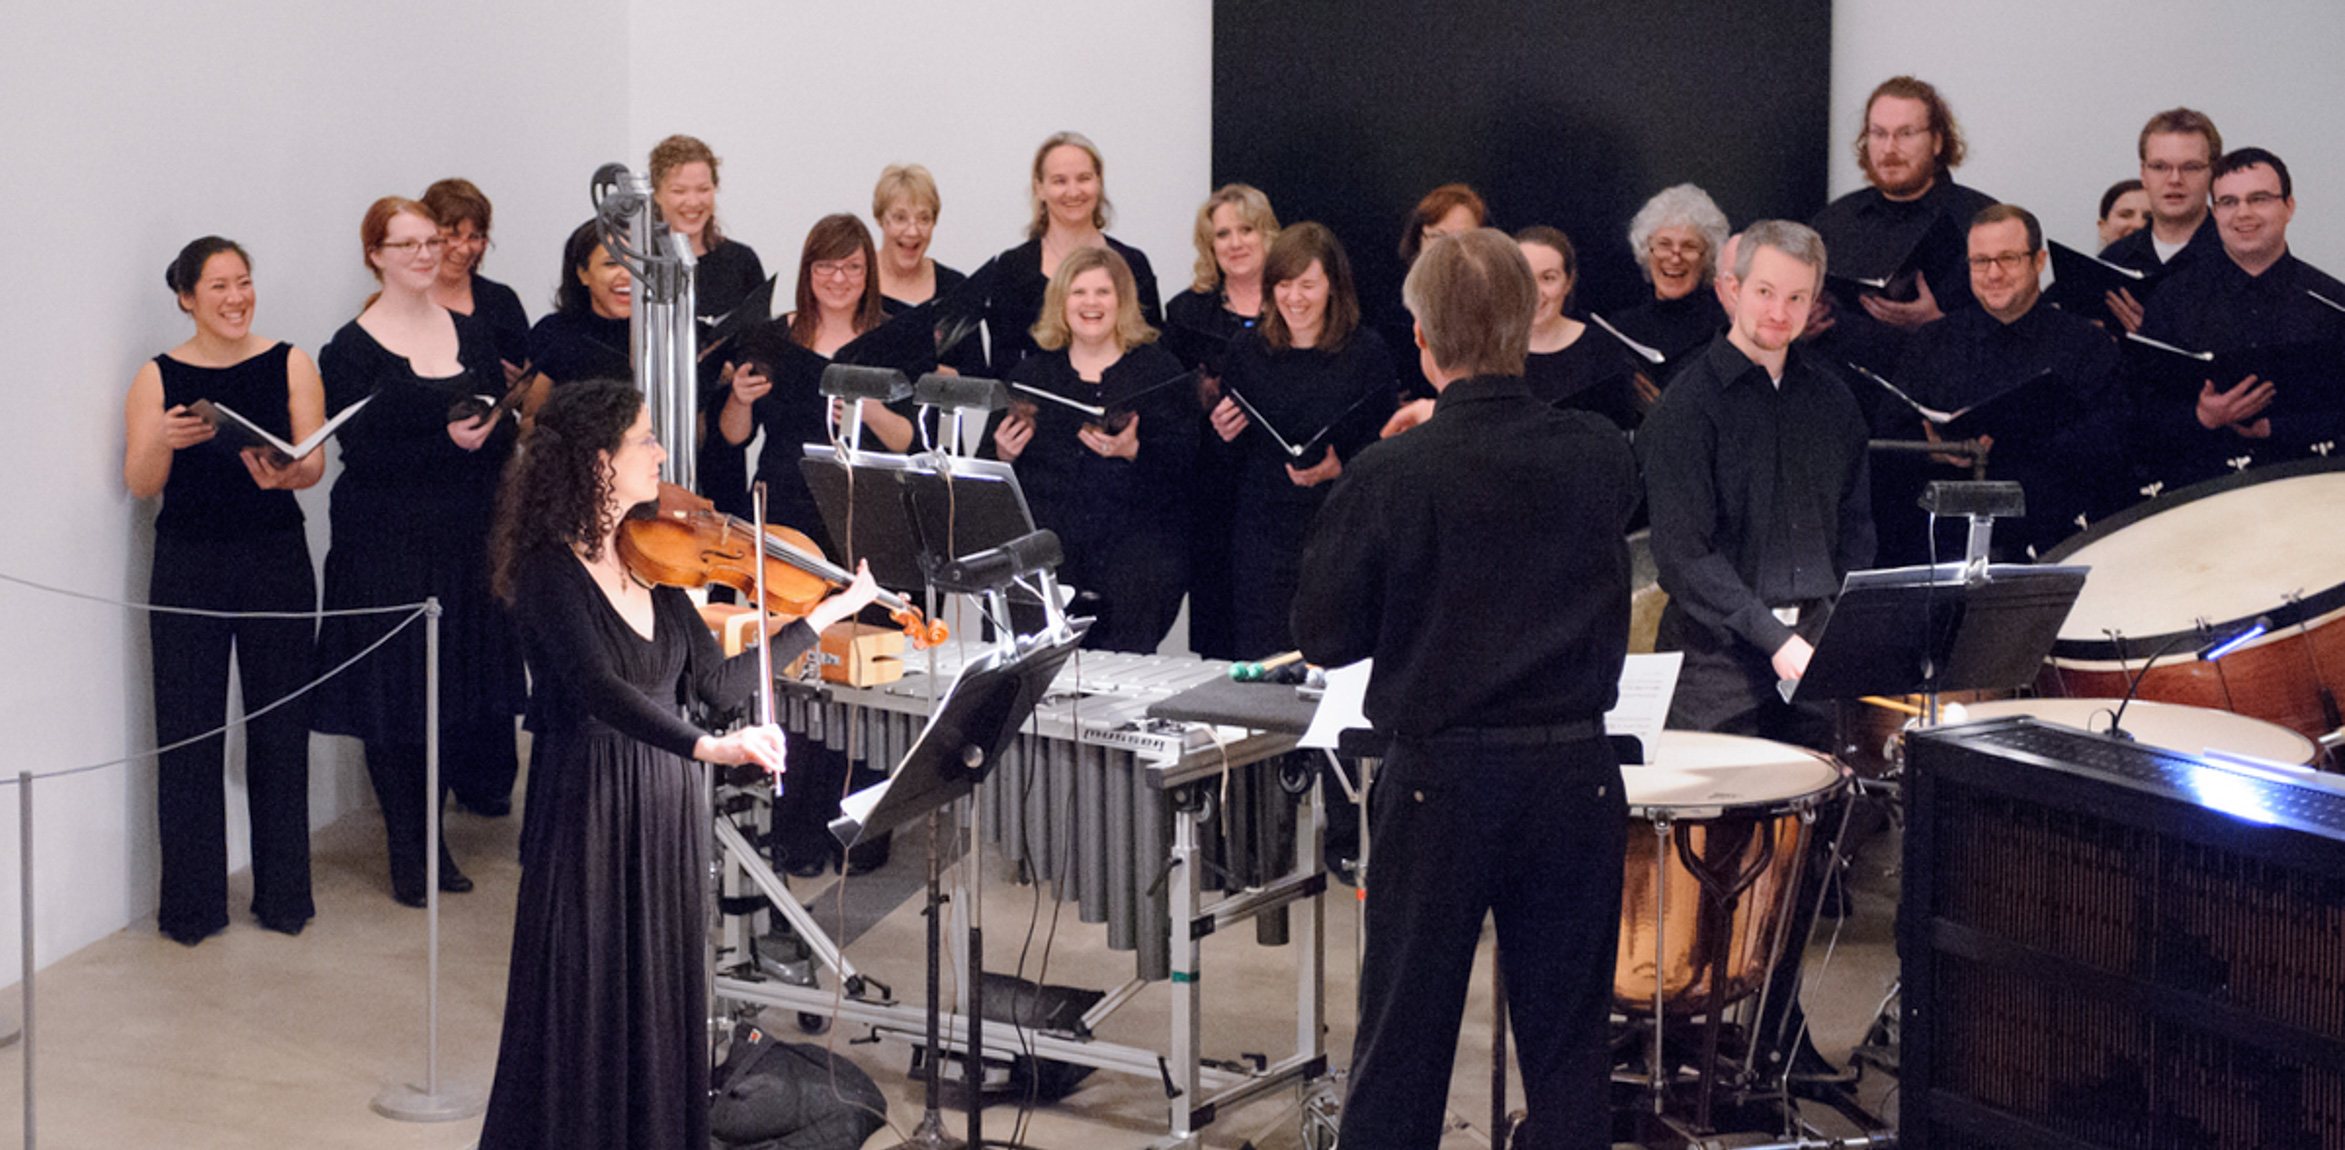 David Robertson conducts musicians and choir singers in the Lower Main Gallery.